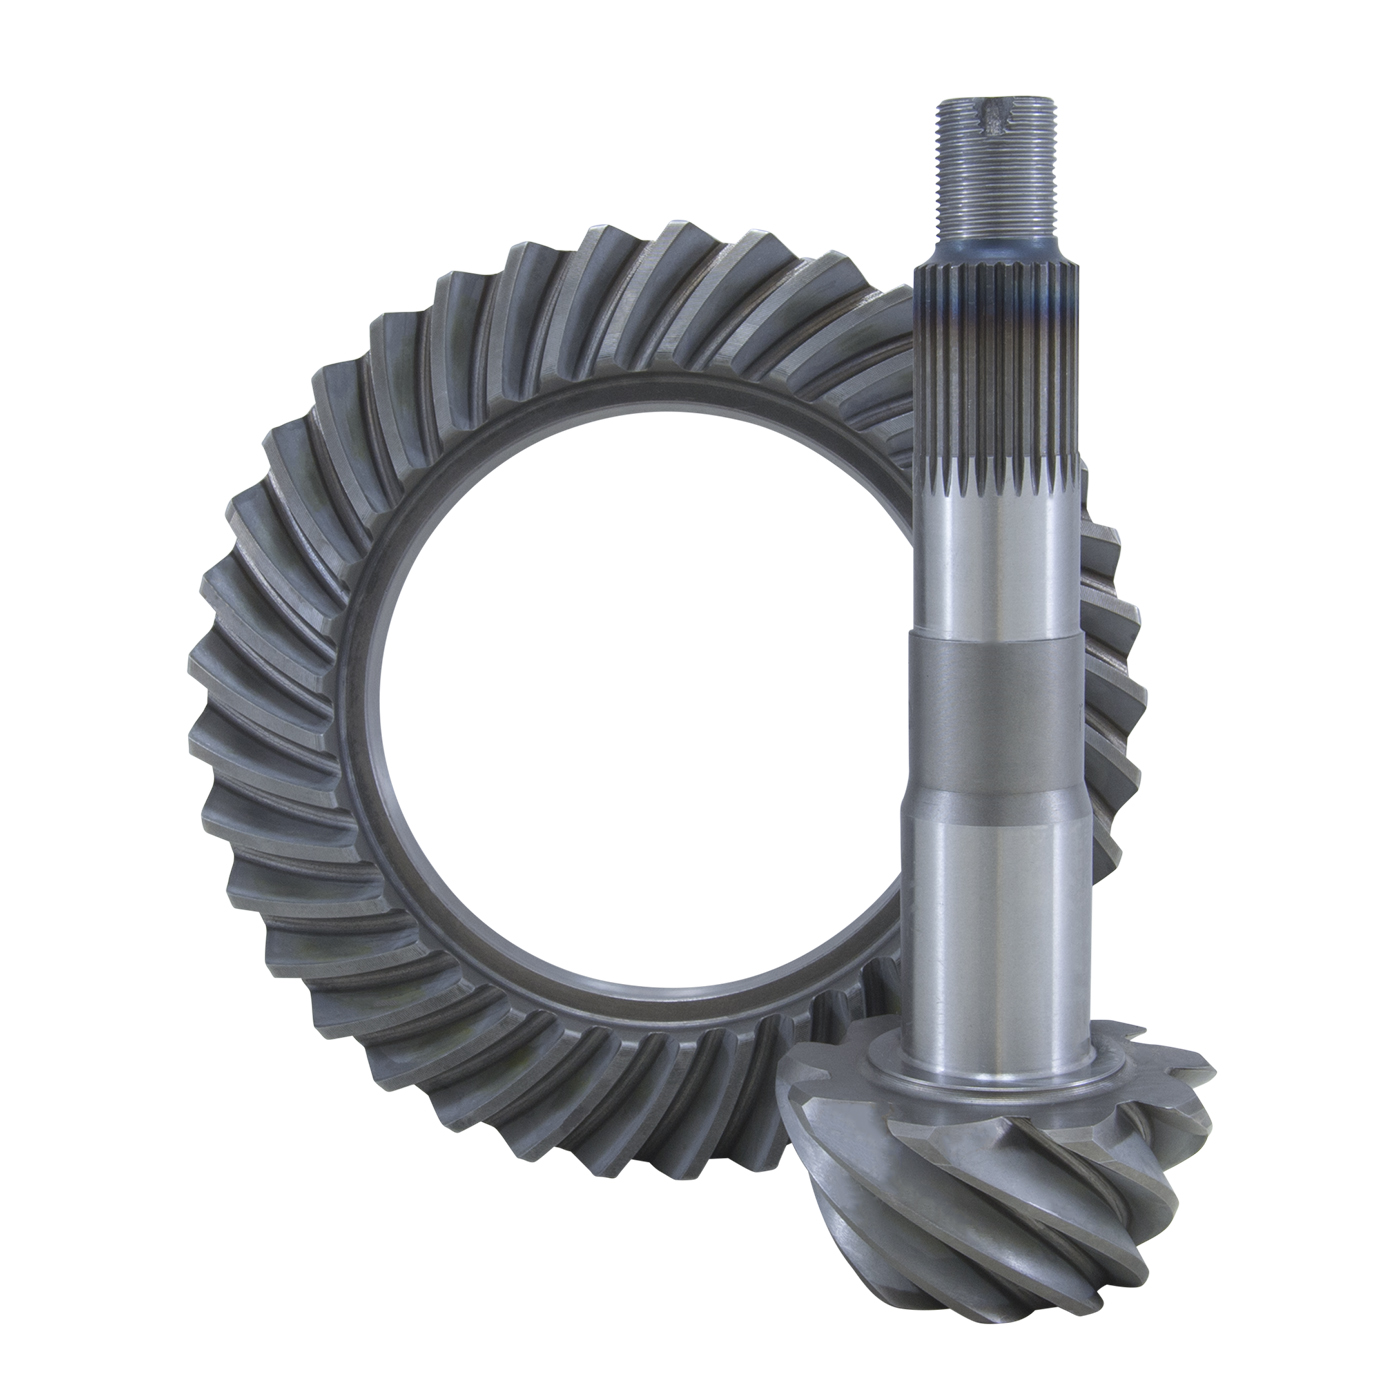 High performance Yukon Ring & Pinion gear set for Toyota V6 in a